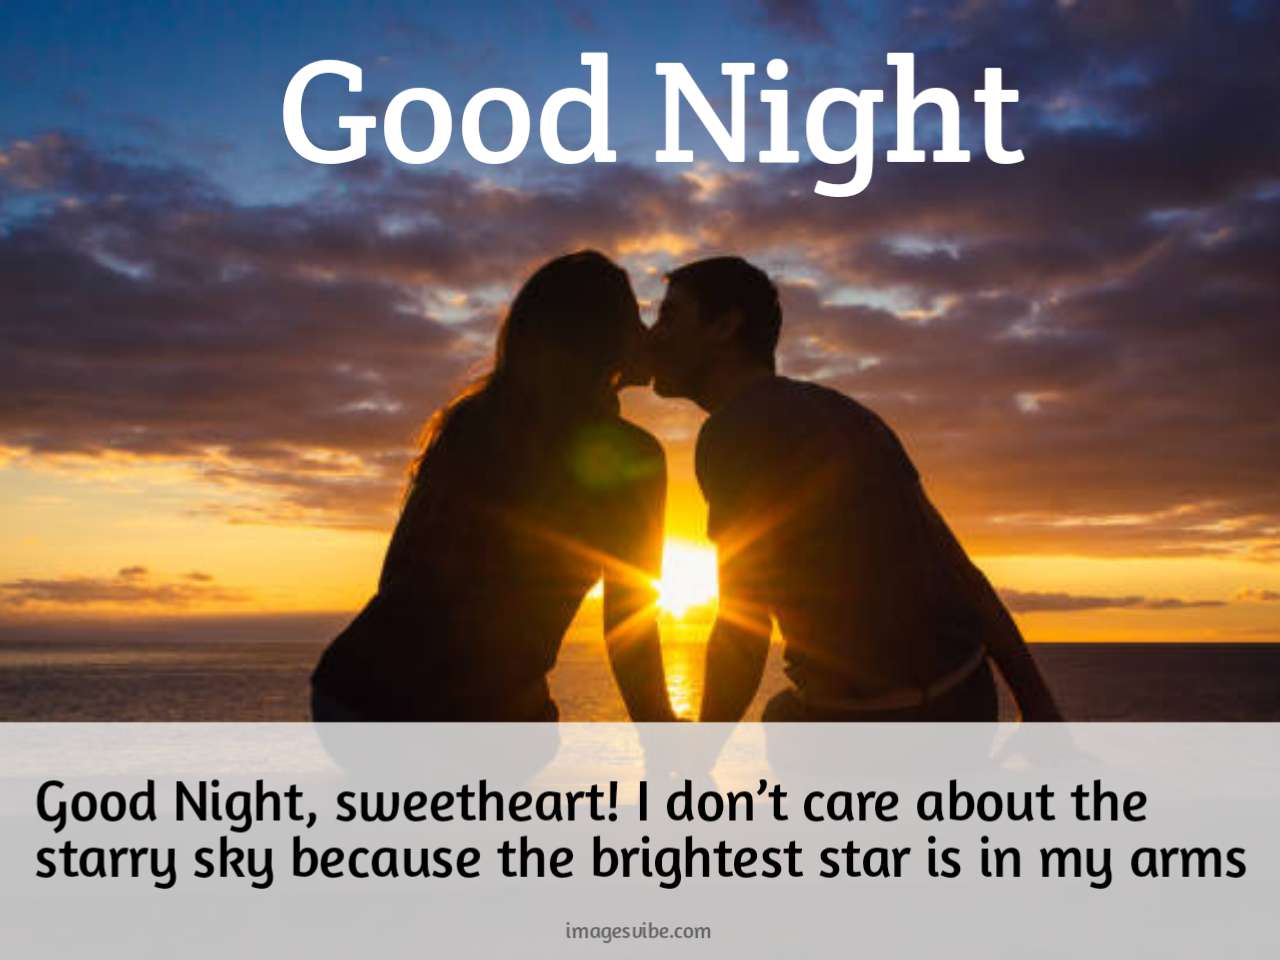 Beautiful Good Night Images With Love Quotes in 2022 - Images Vibe